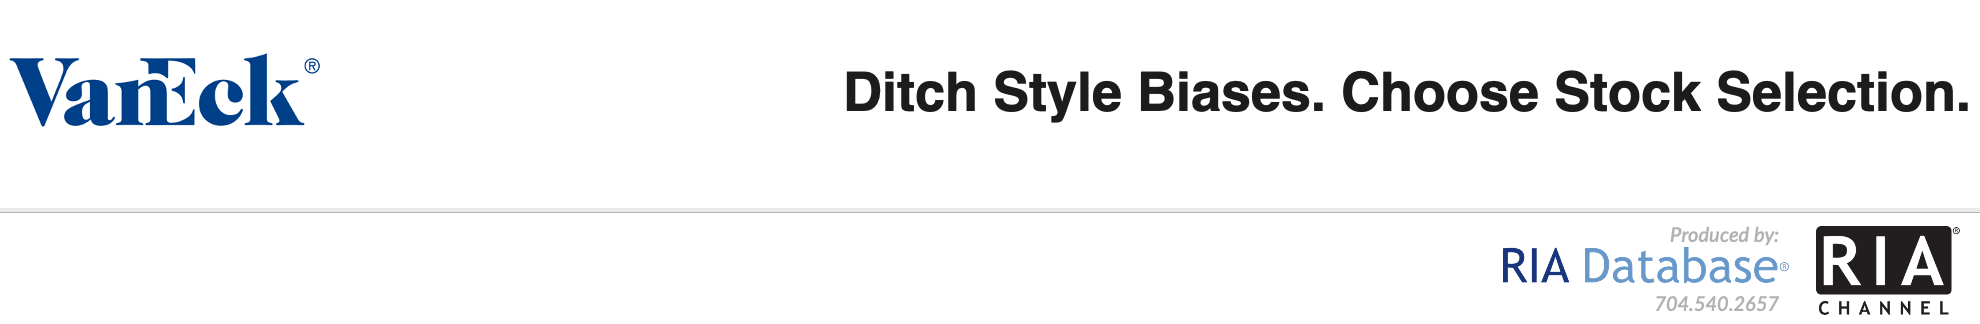 Ditch Style Biases. Choose Stock Selection.